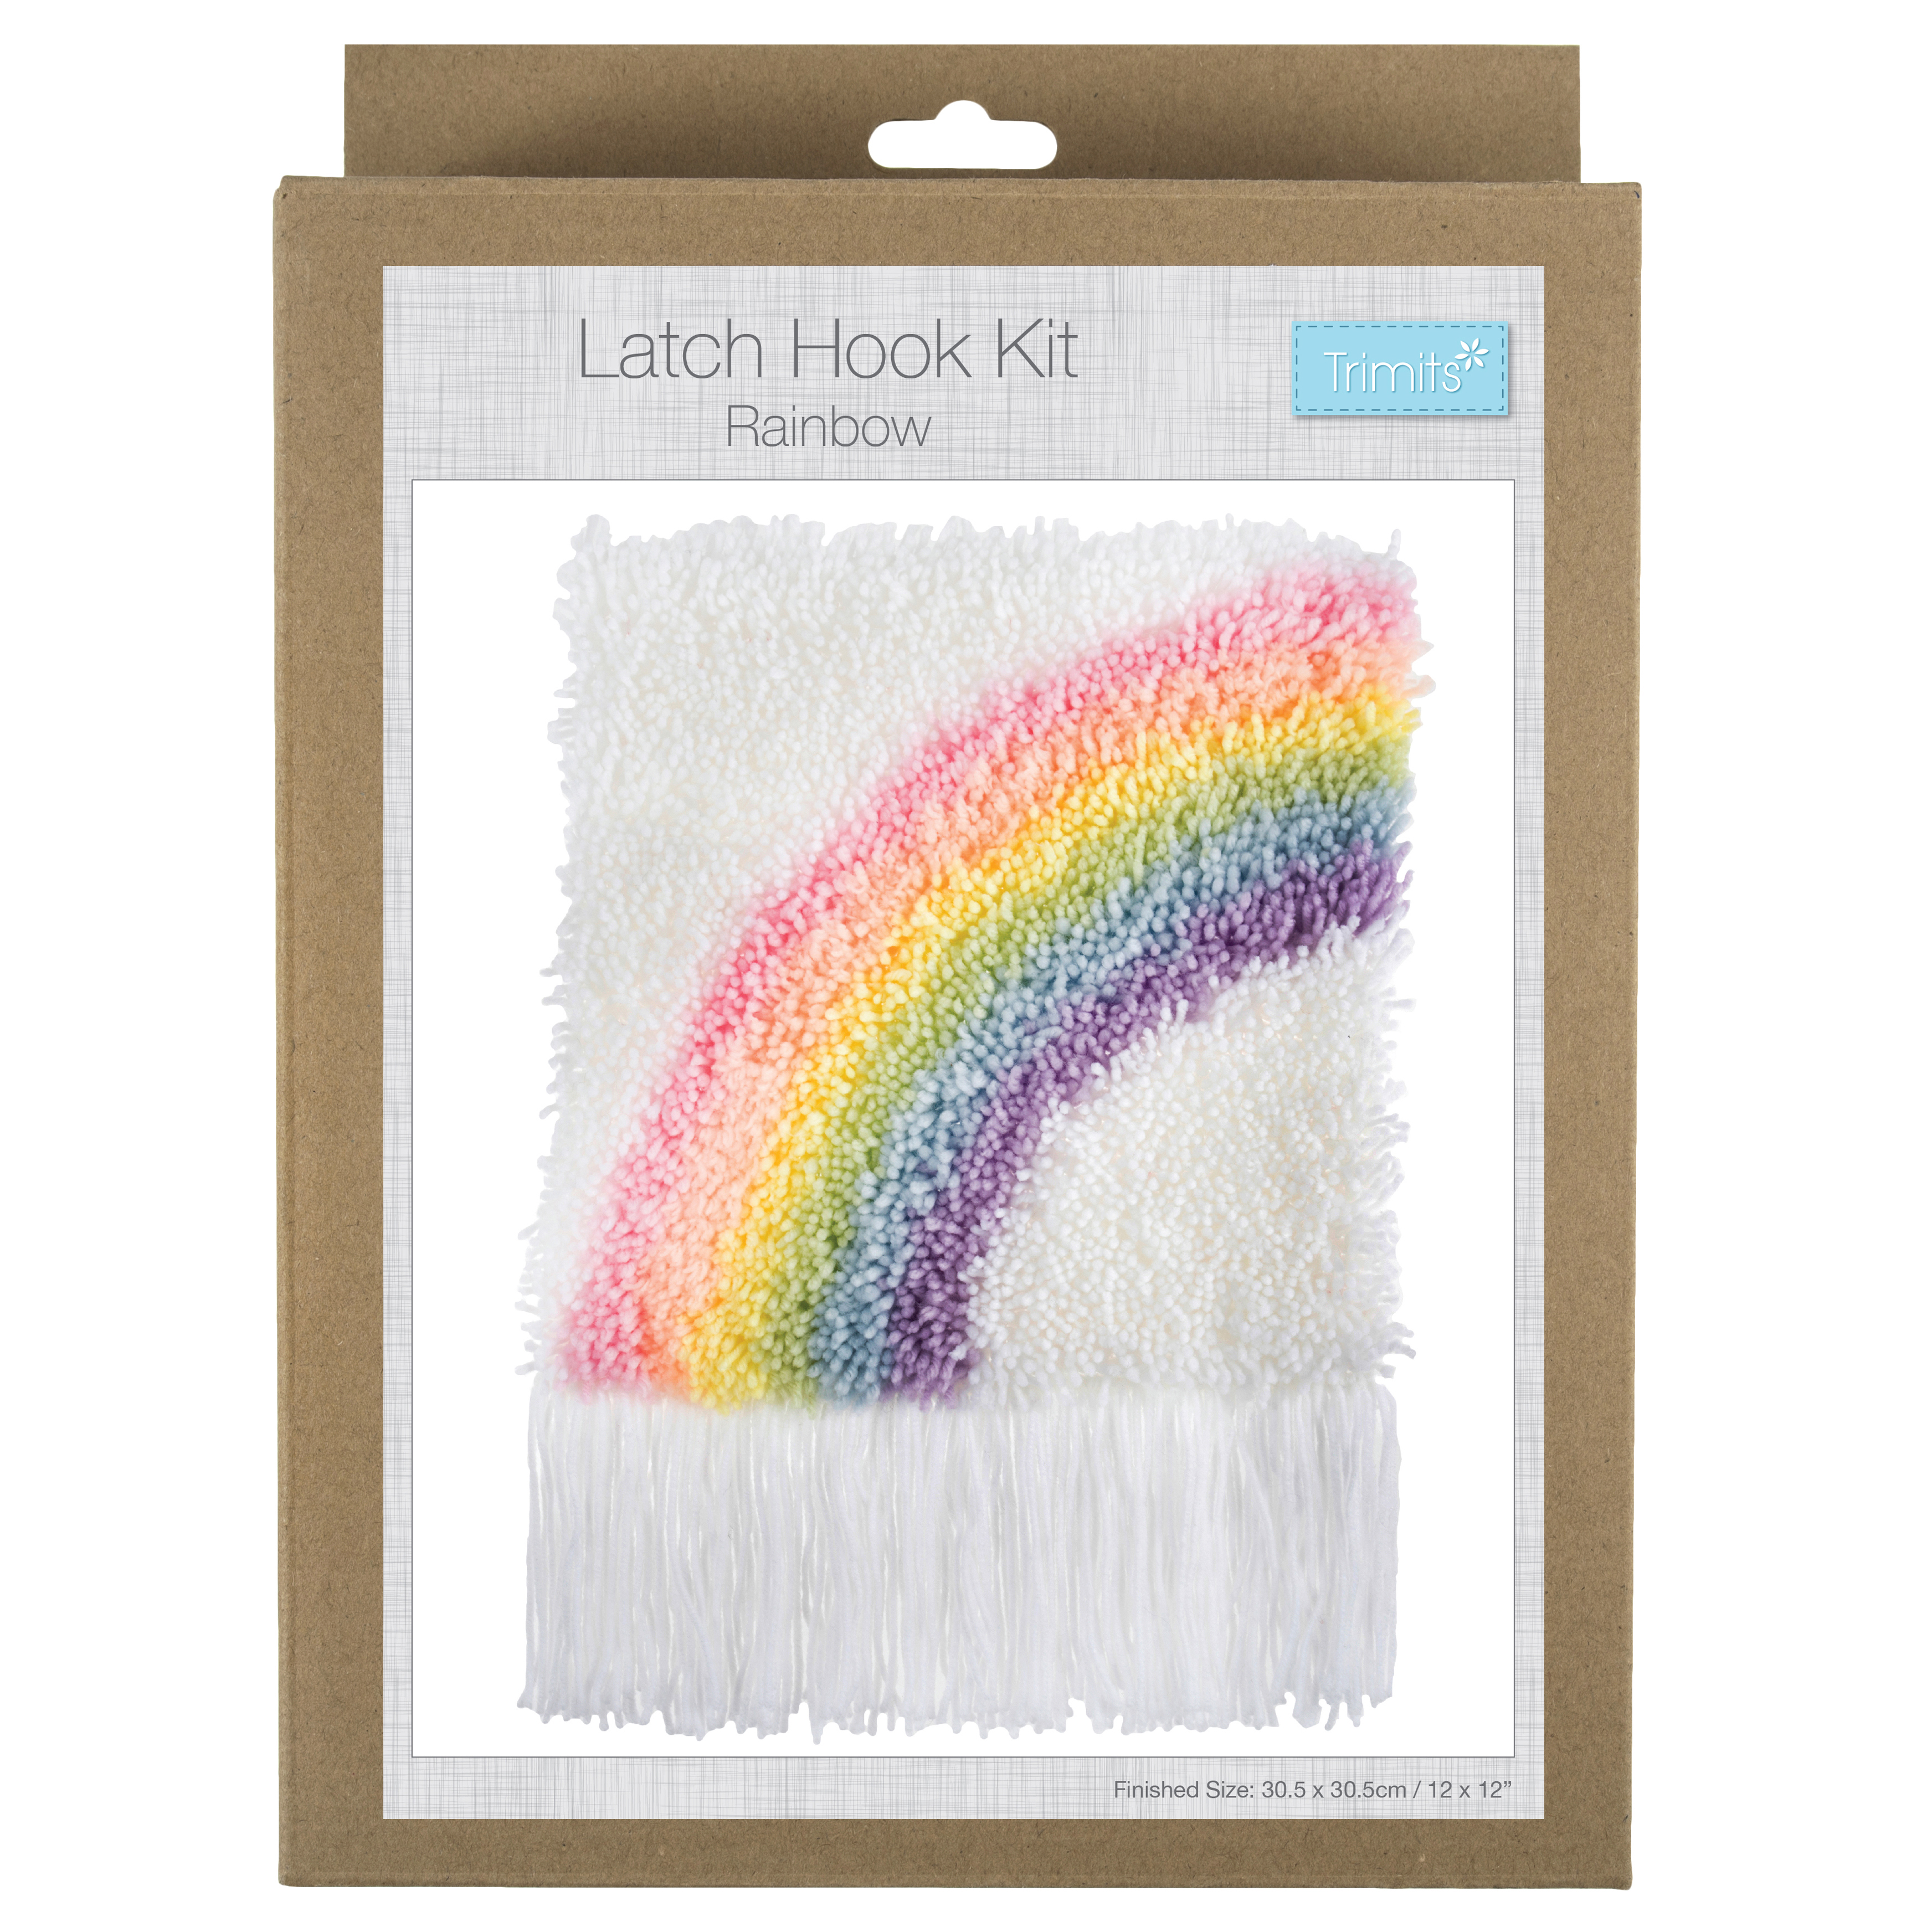 Latch Hook Kit: Rainbow - Trimits - Groves and Banks